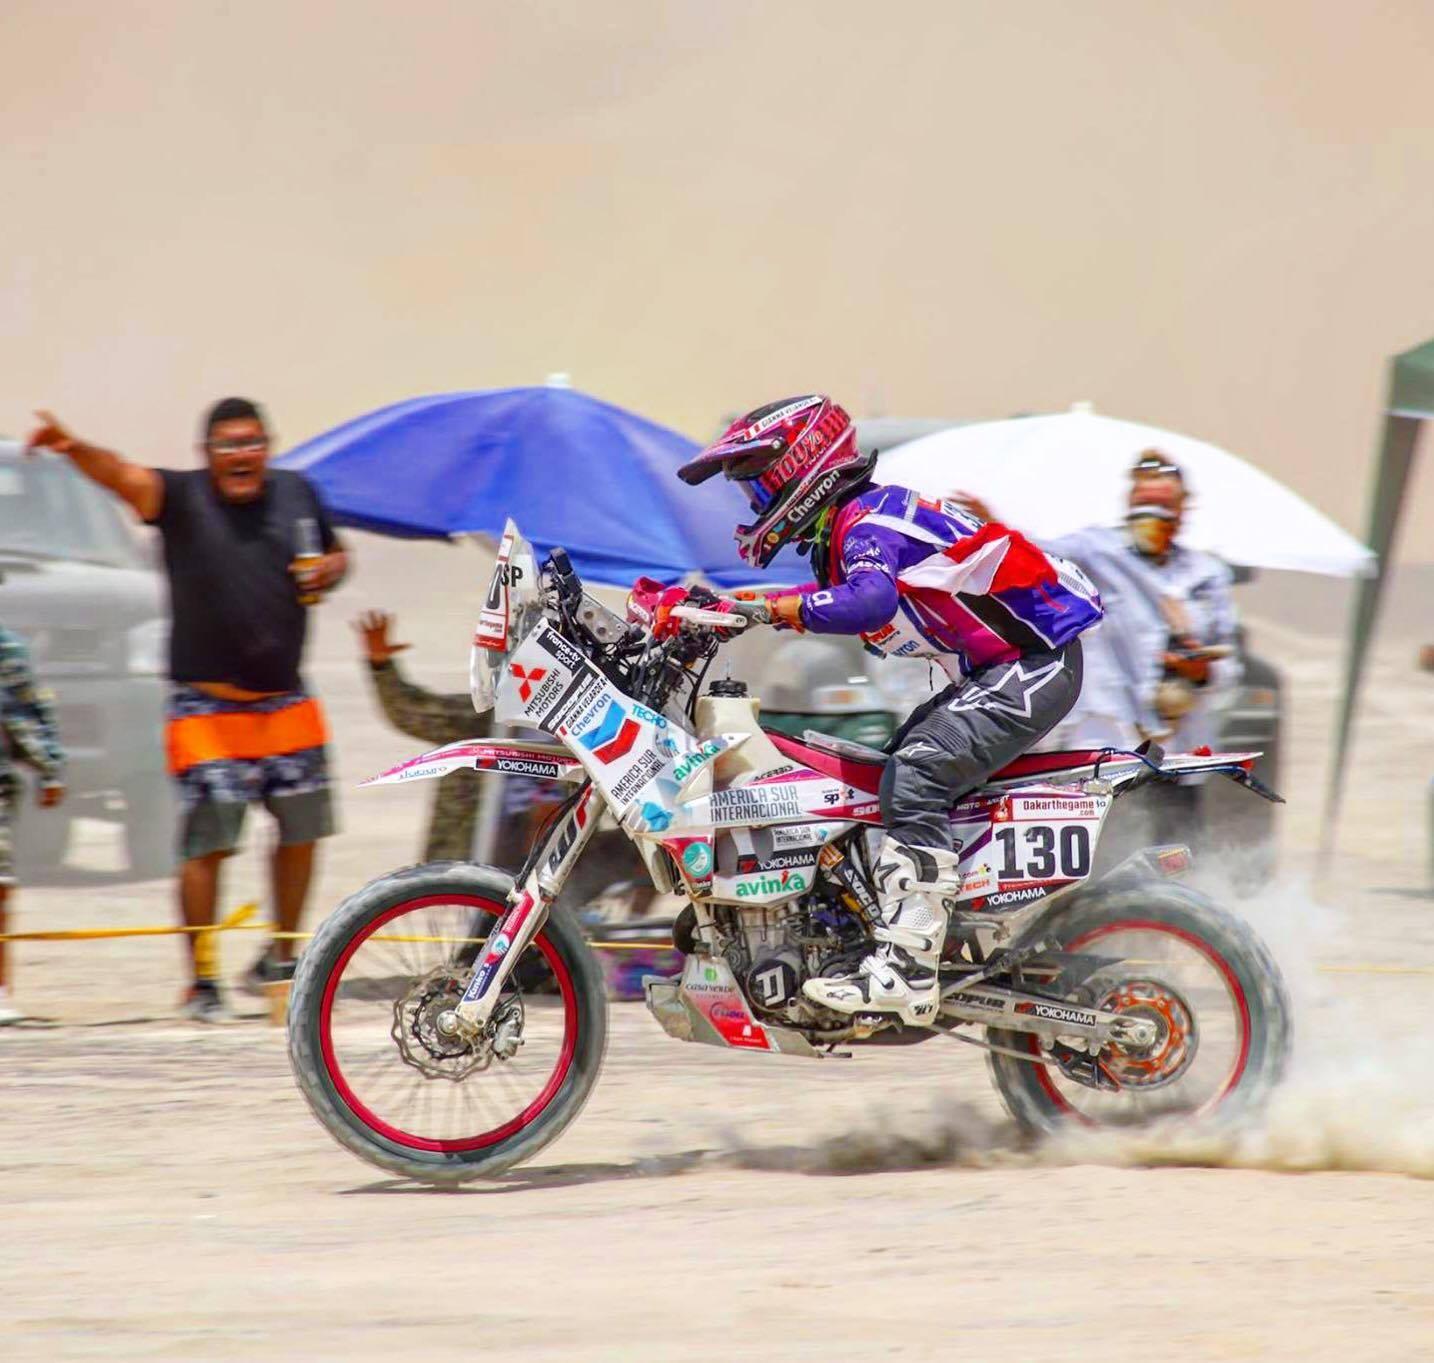 In January, Gianna Velarde became the first Peruvian female rider to race in the Dakar Rally.